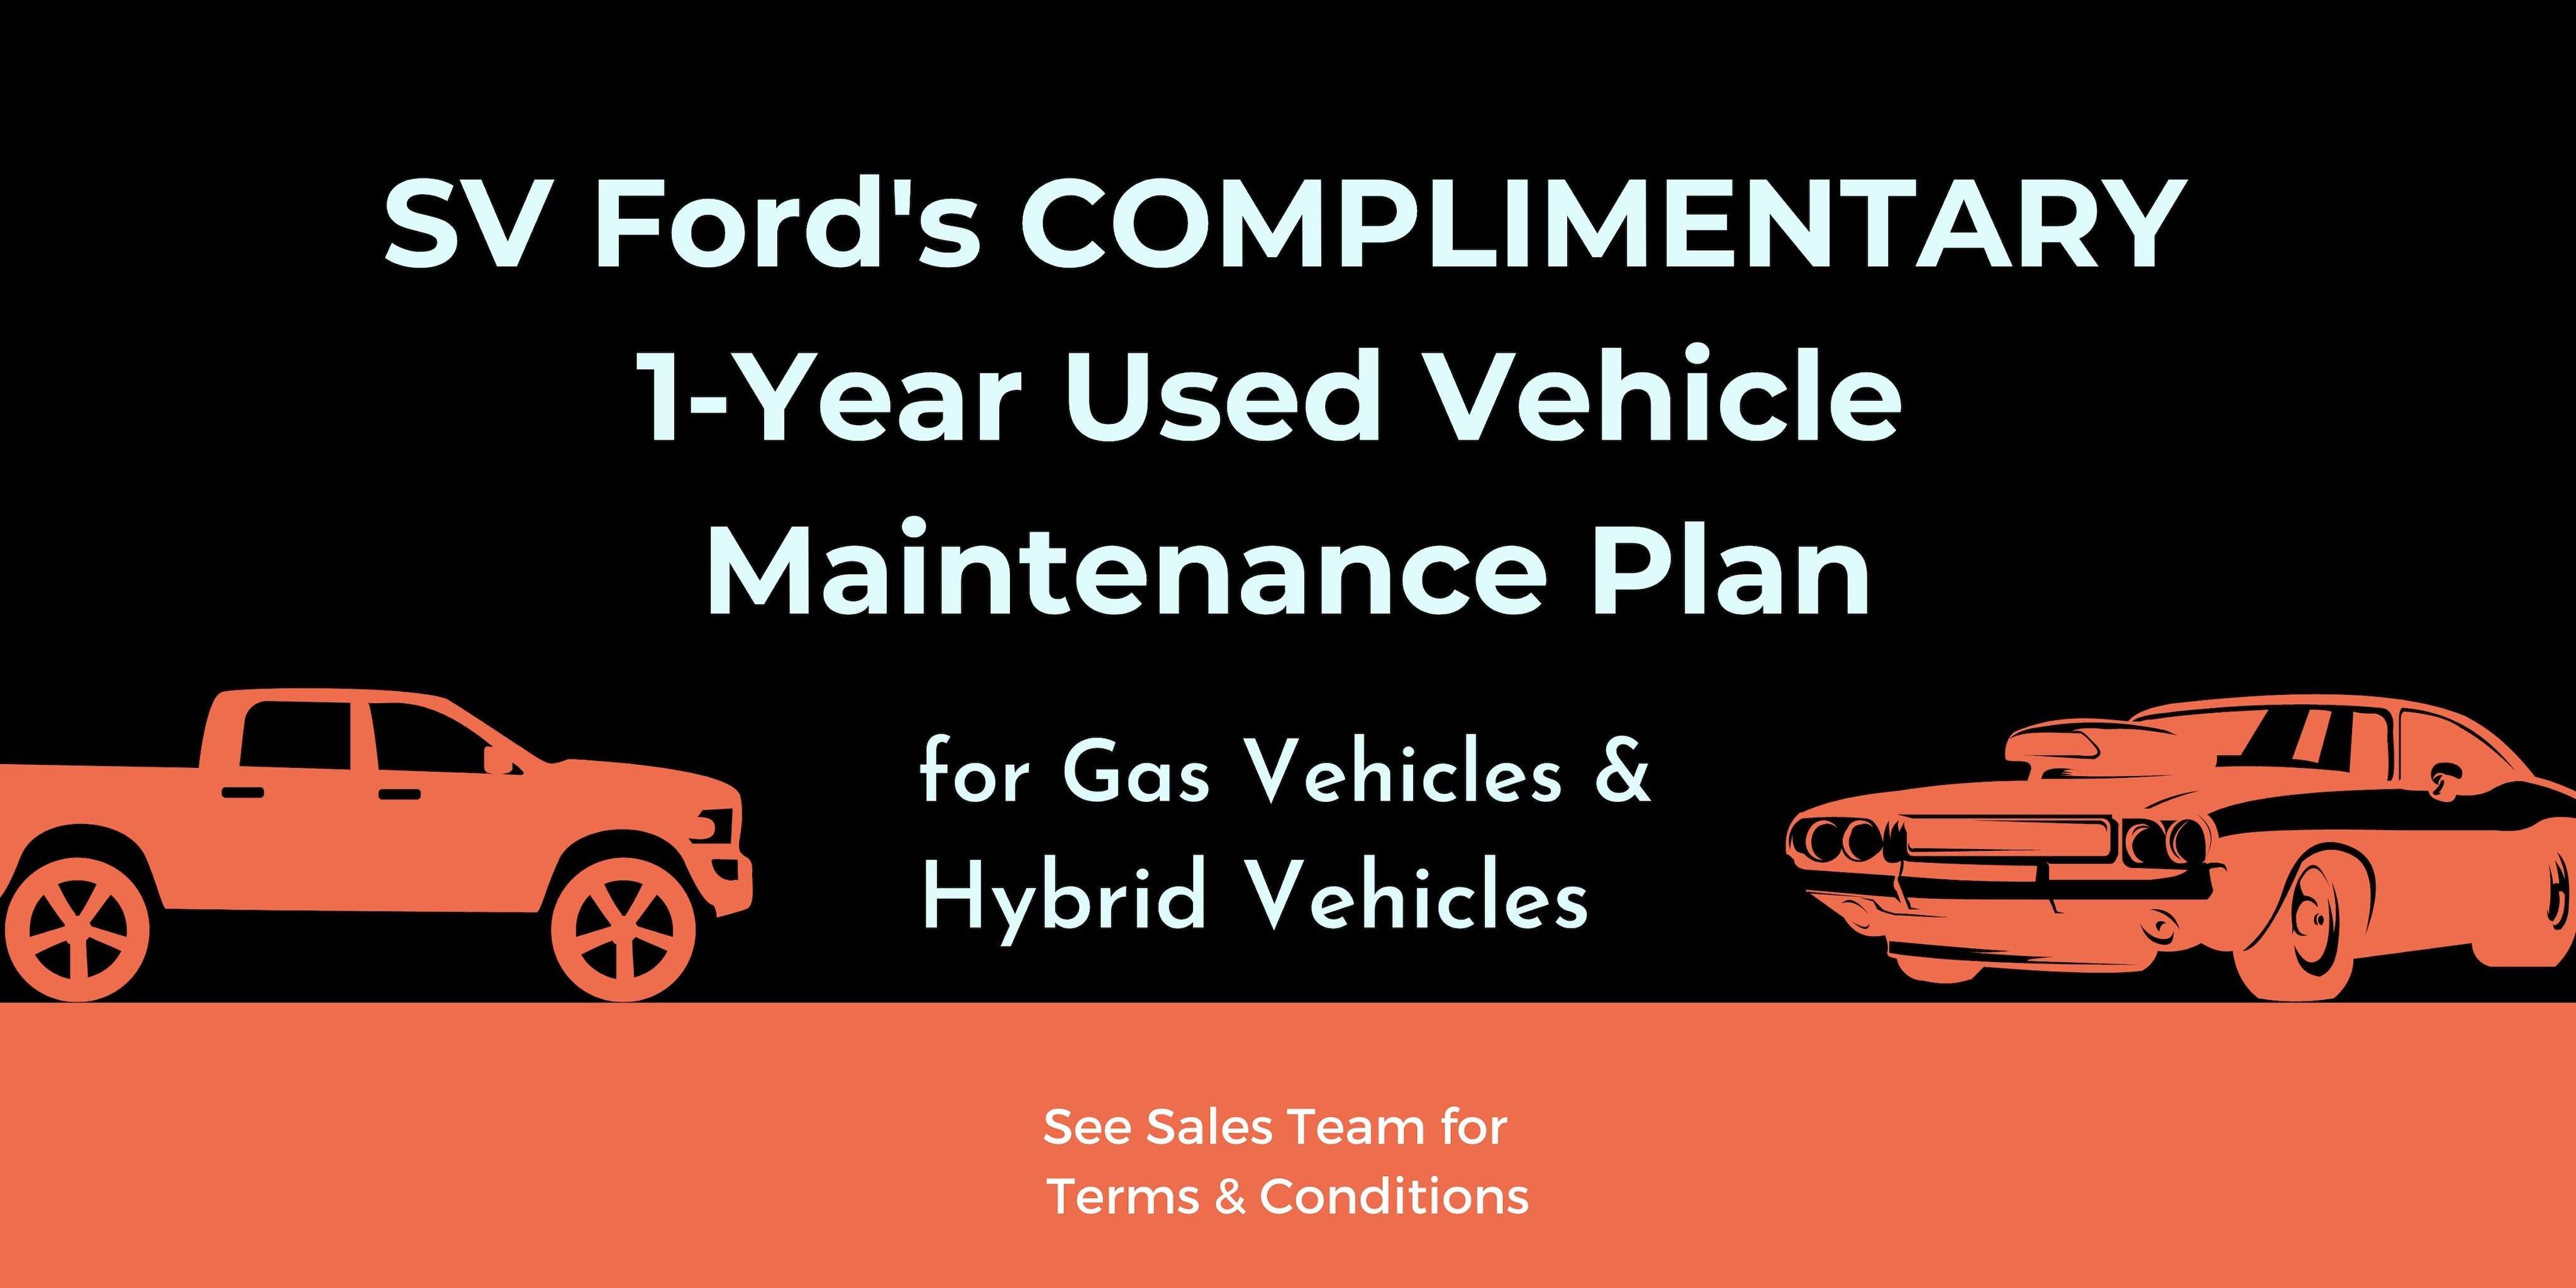 Complimentary 1-year used vehicle maintenance plan graphic